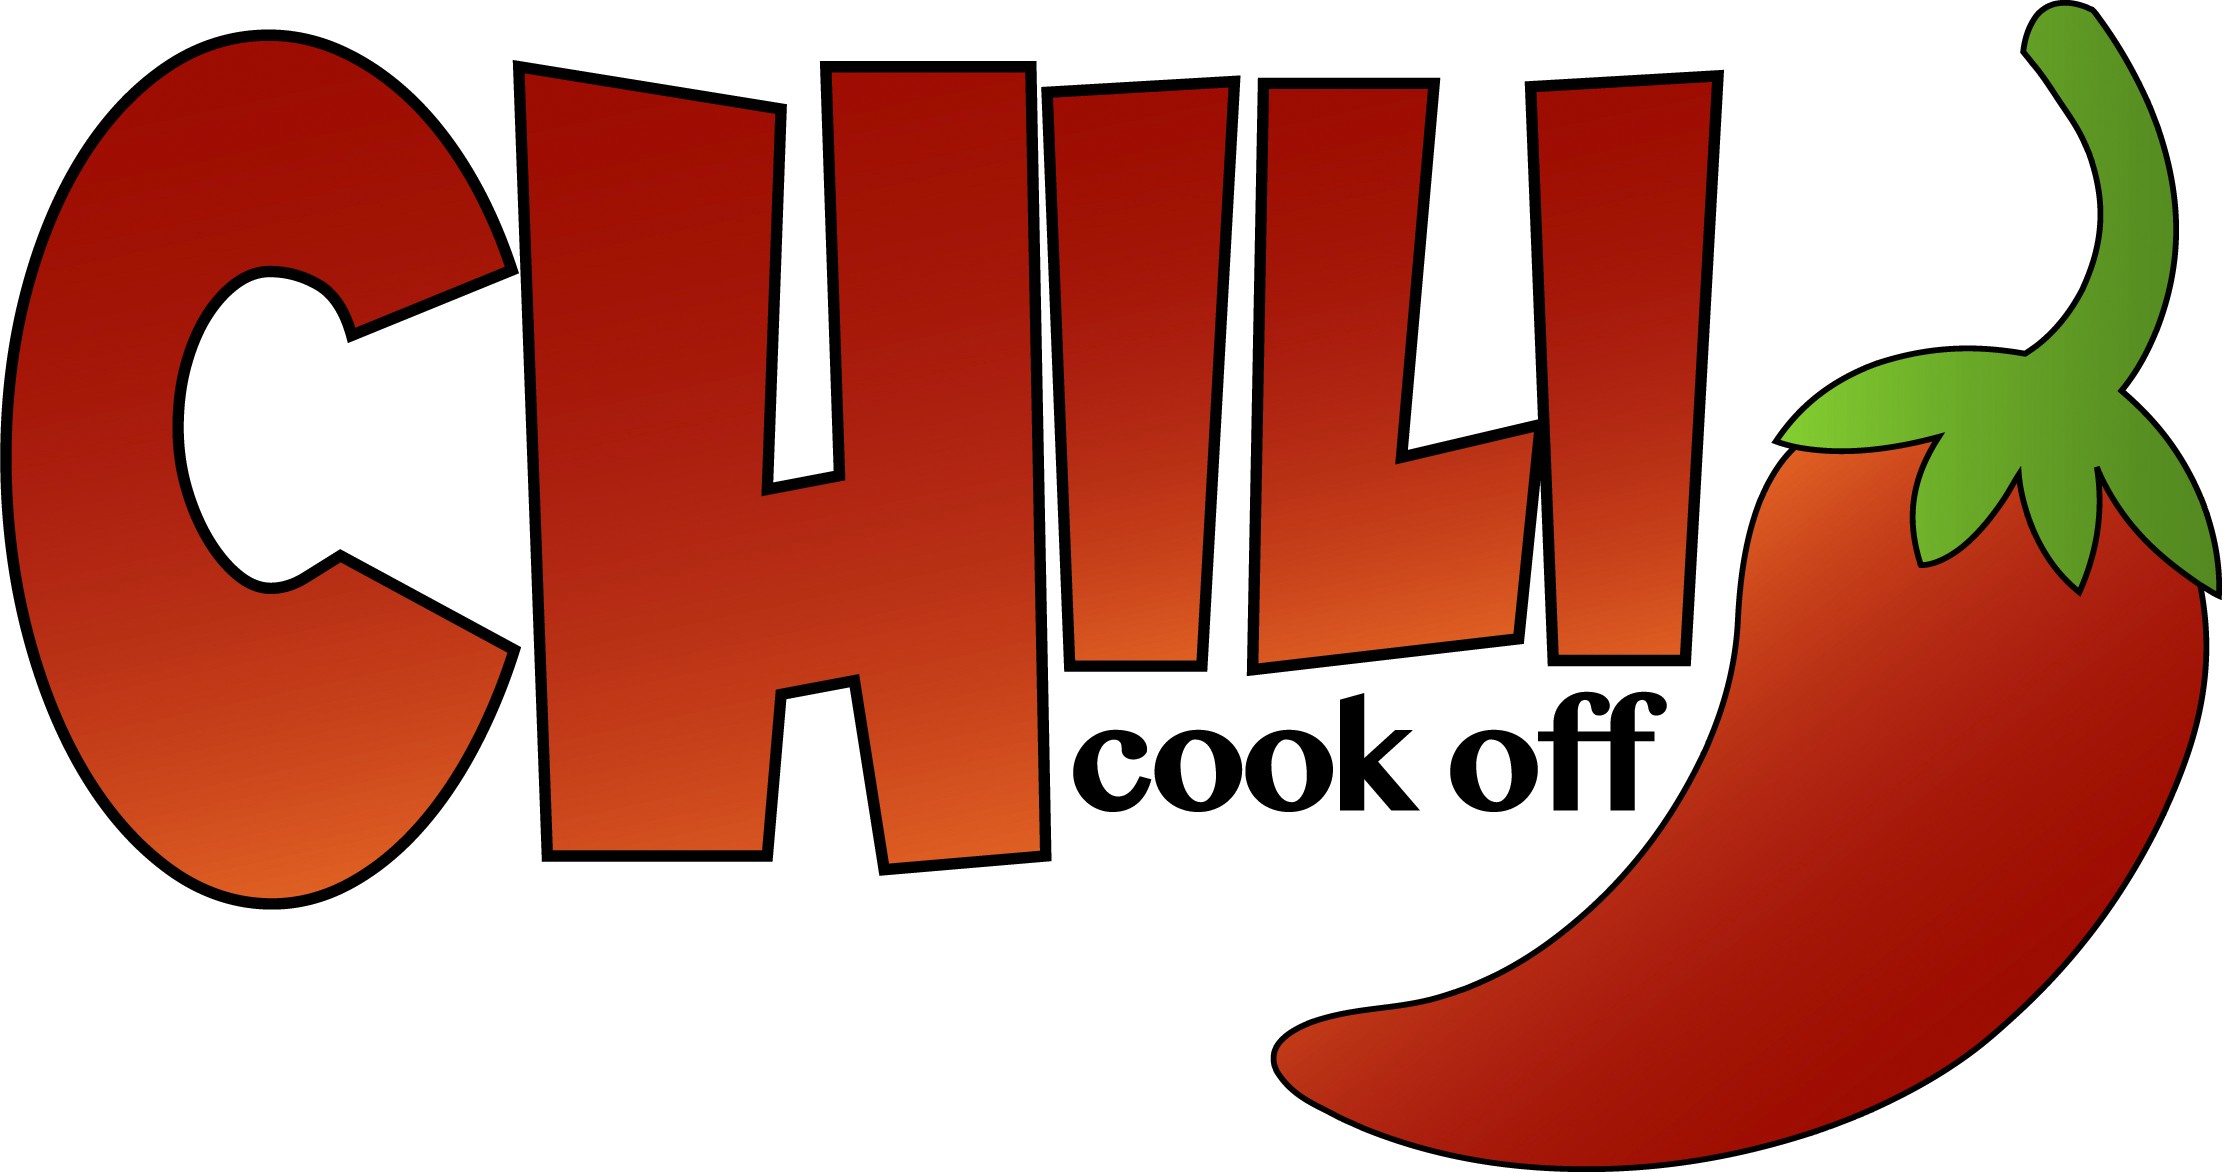 chili-cook-off-vector-at-getdrawings-free-download